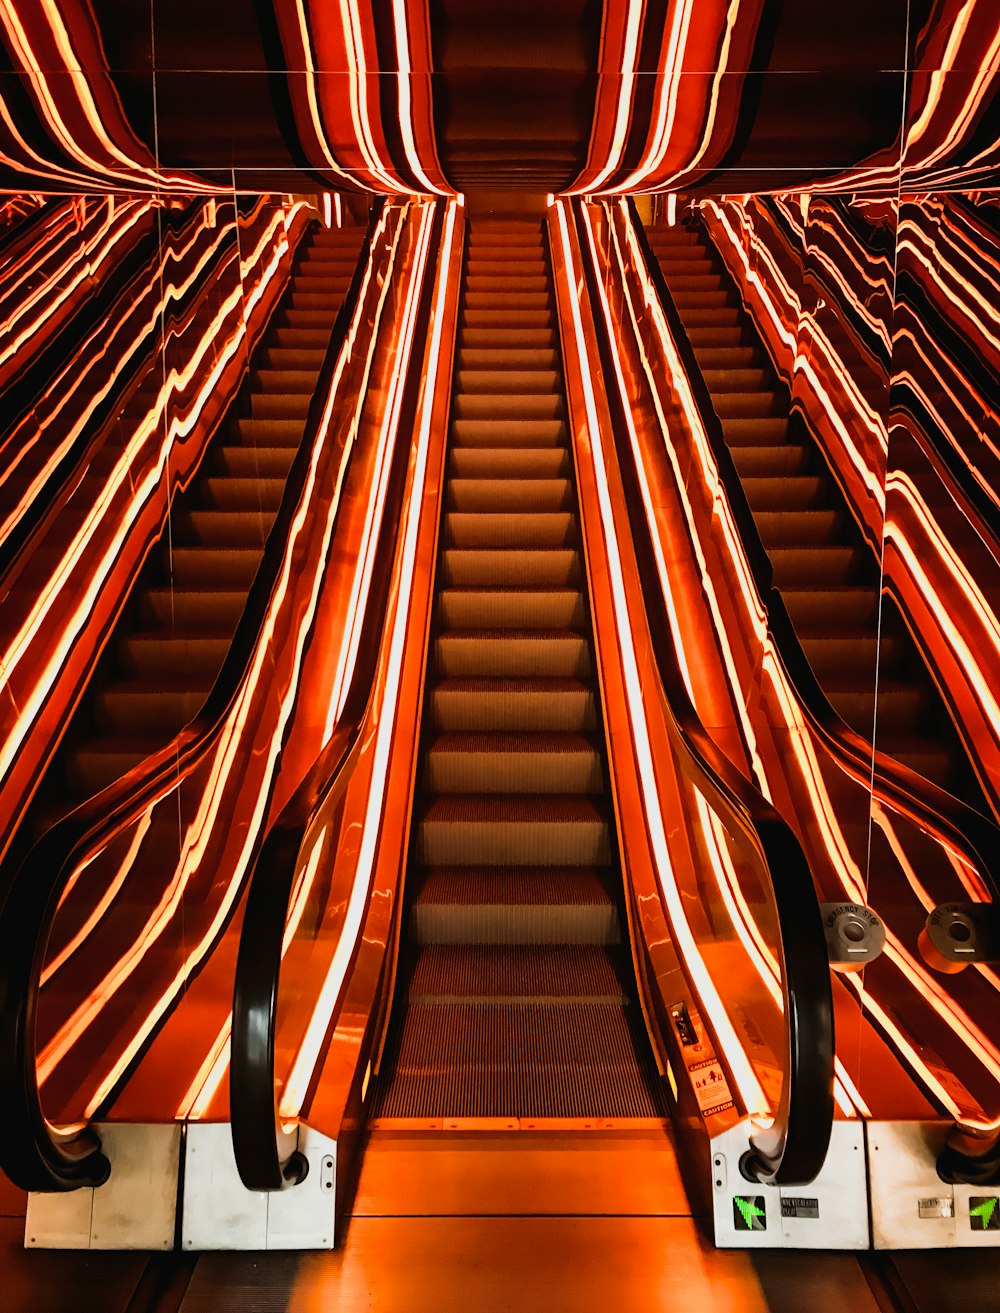 a set of escalators with red and white striped seats